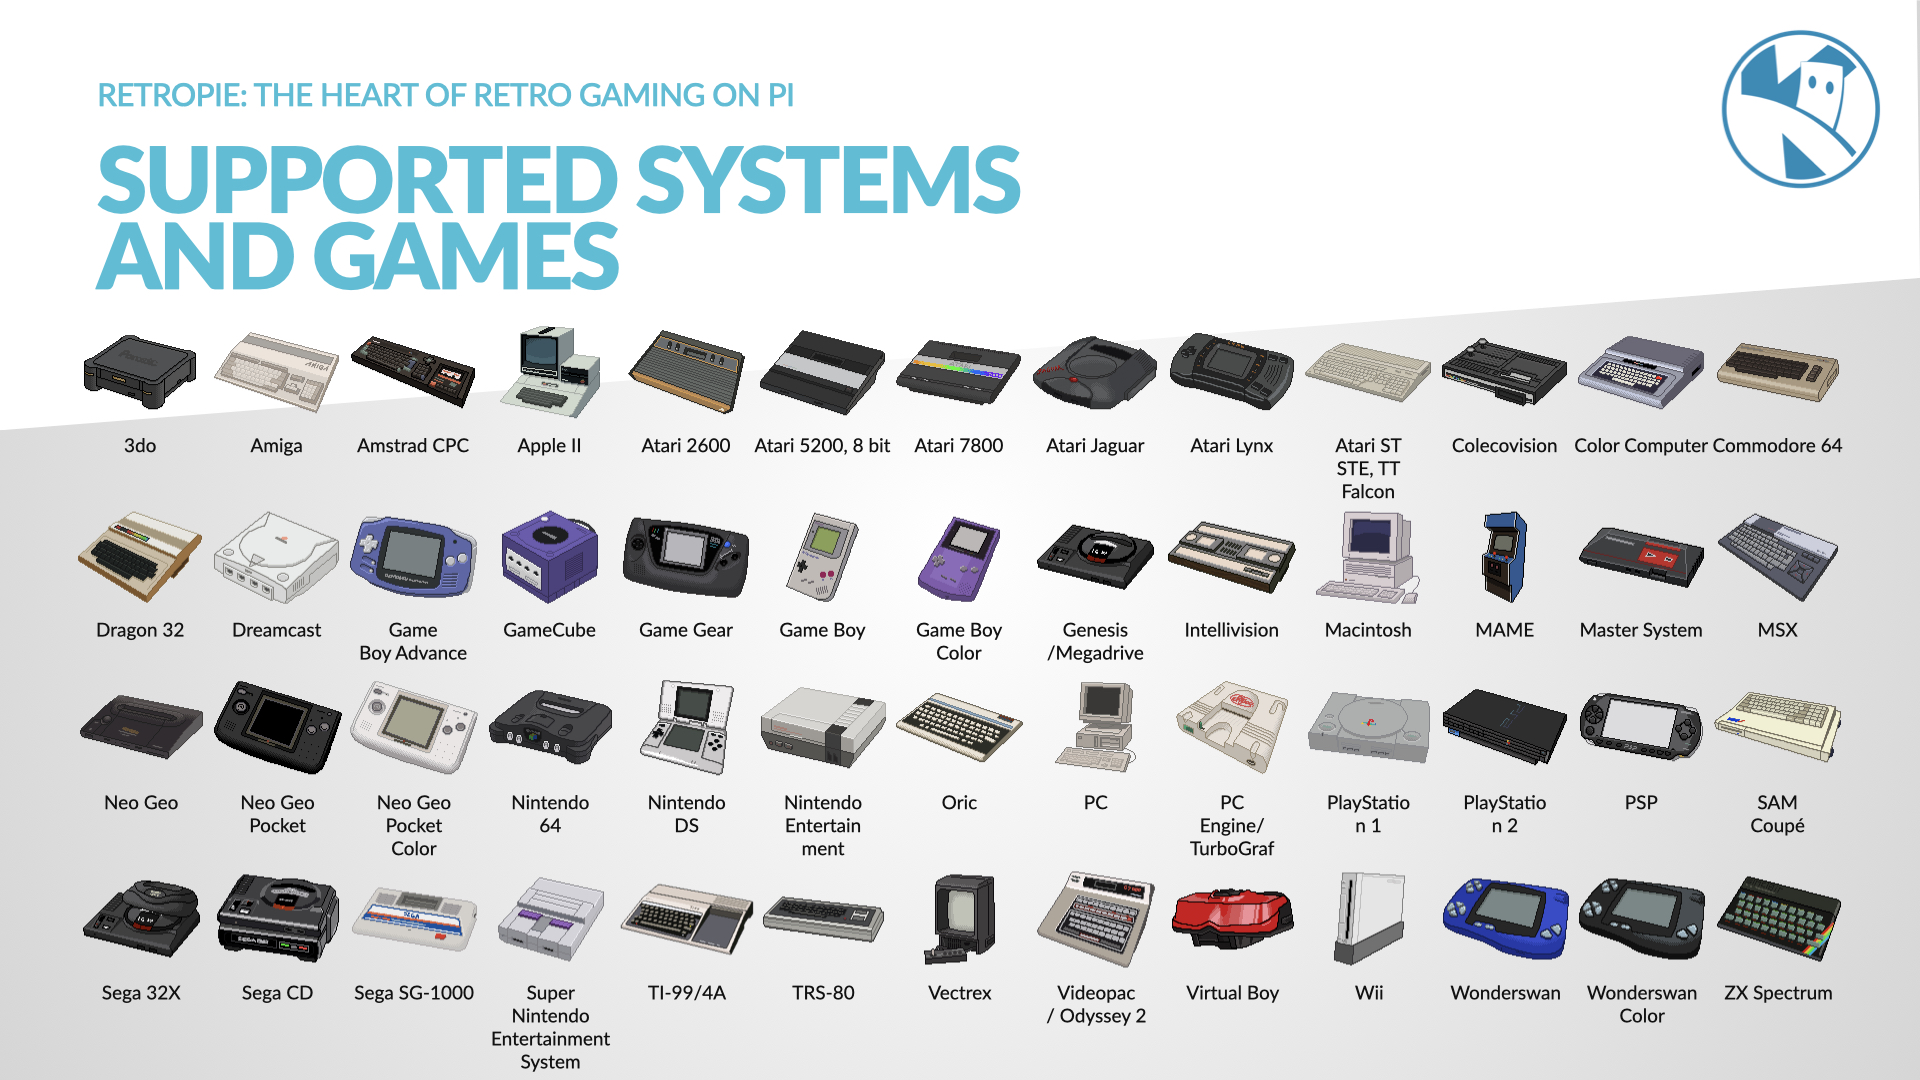 All the game systems supported